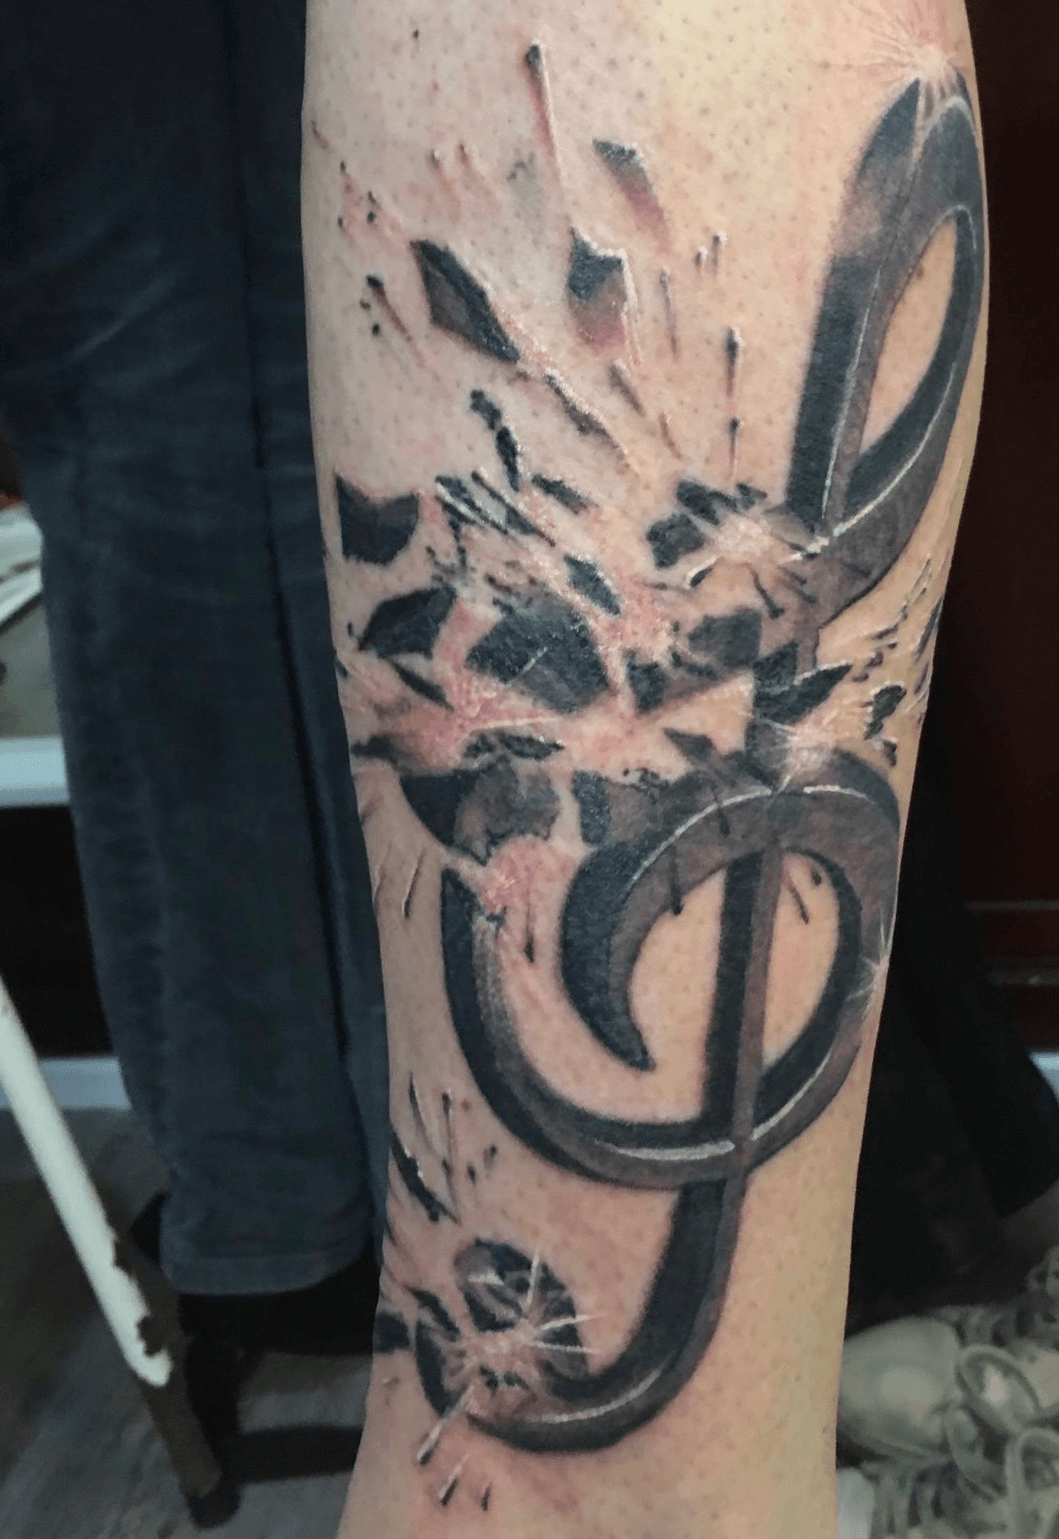 Treble clef done by Steven Anderson at 252 Tattoo in Colombia Station OH   rtattoos